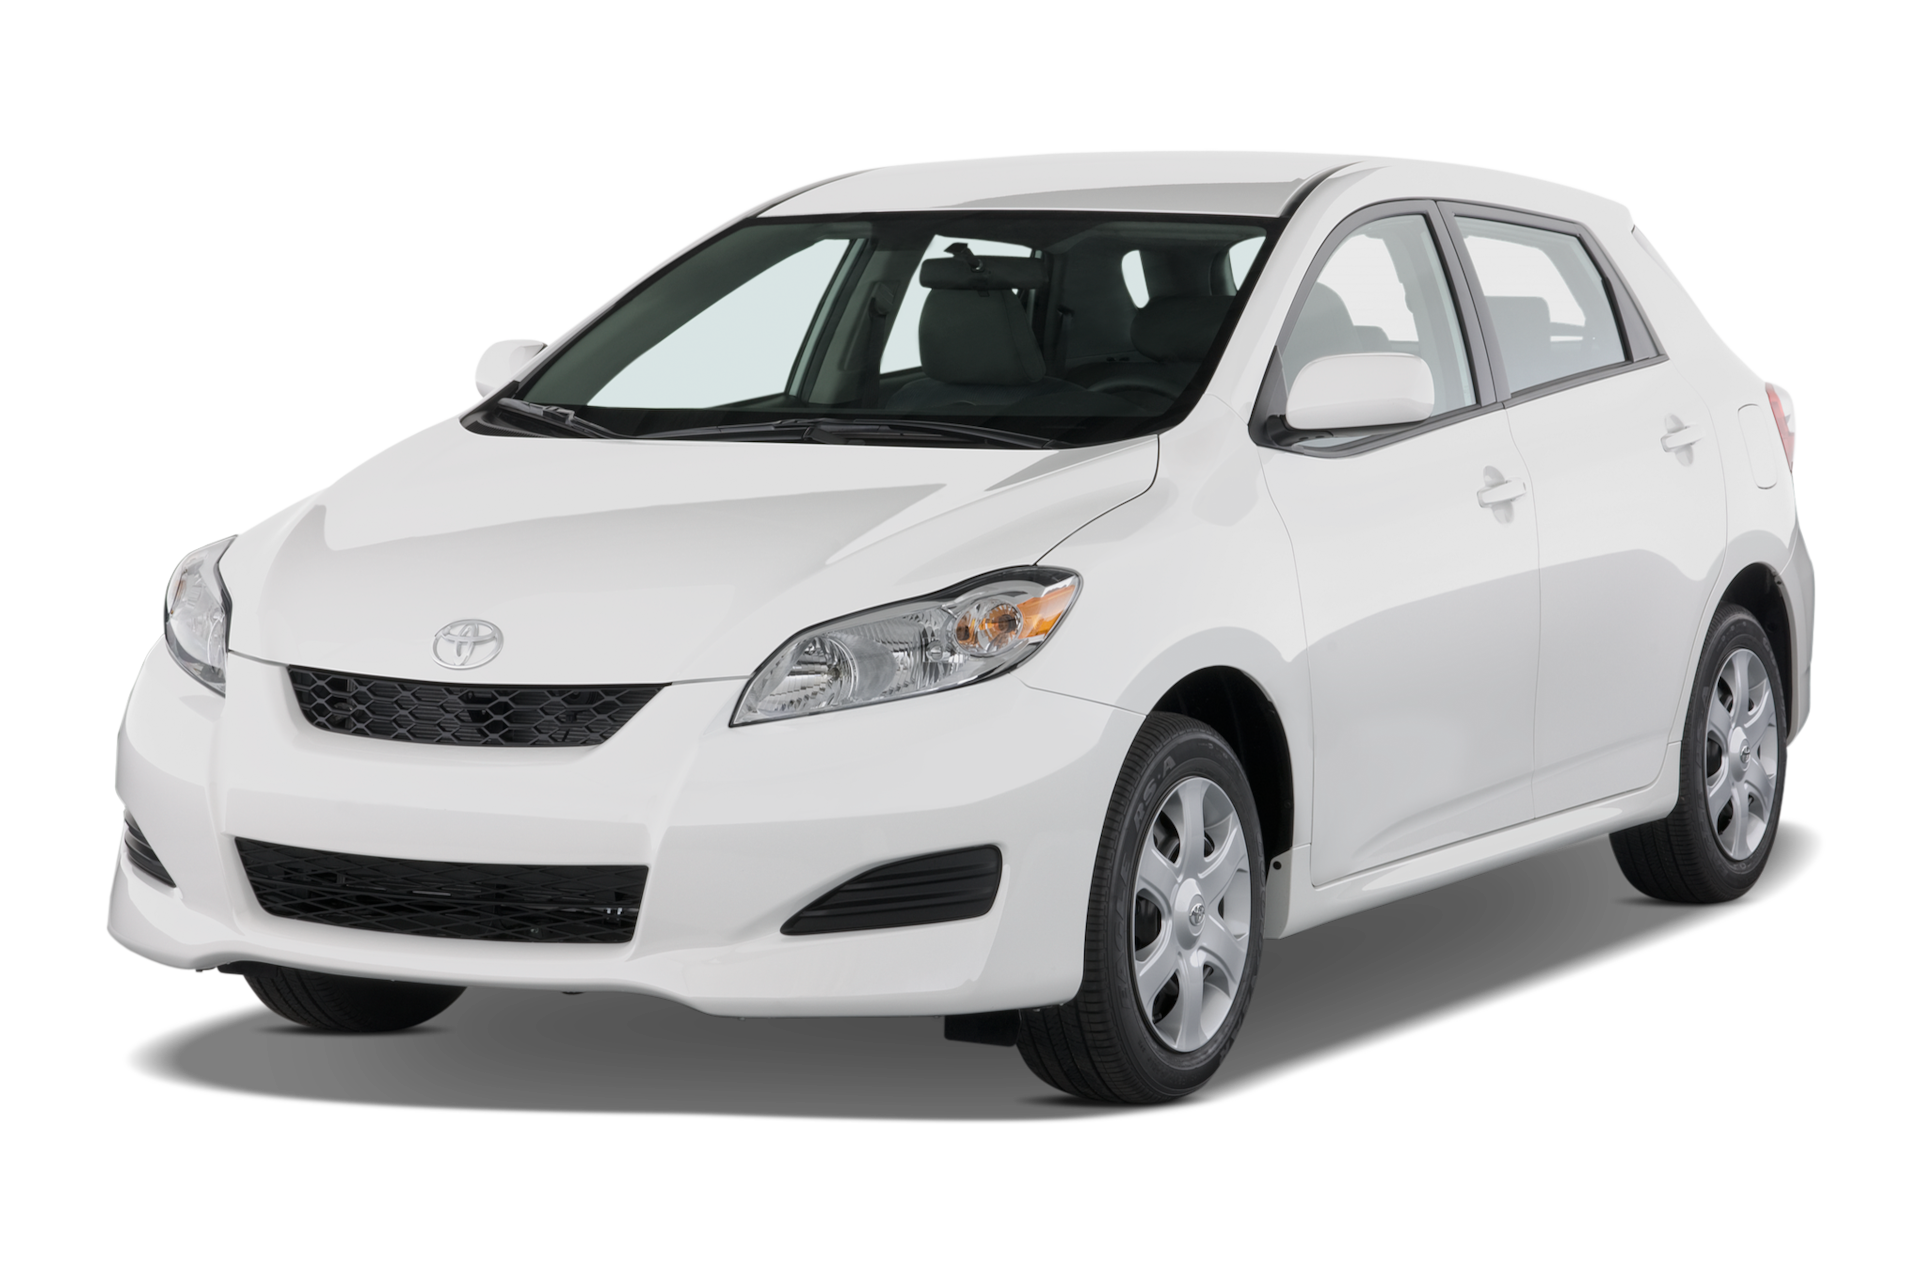 2010 Toyota Matrix Prices, Reviews, and Photos - MotorTrend